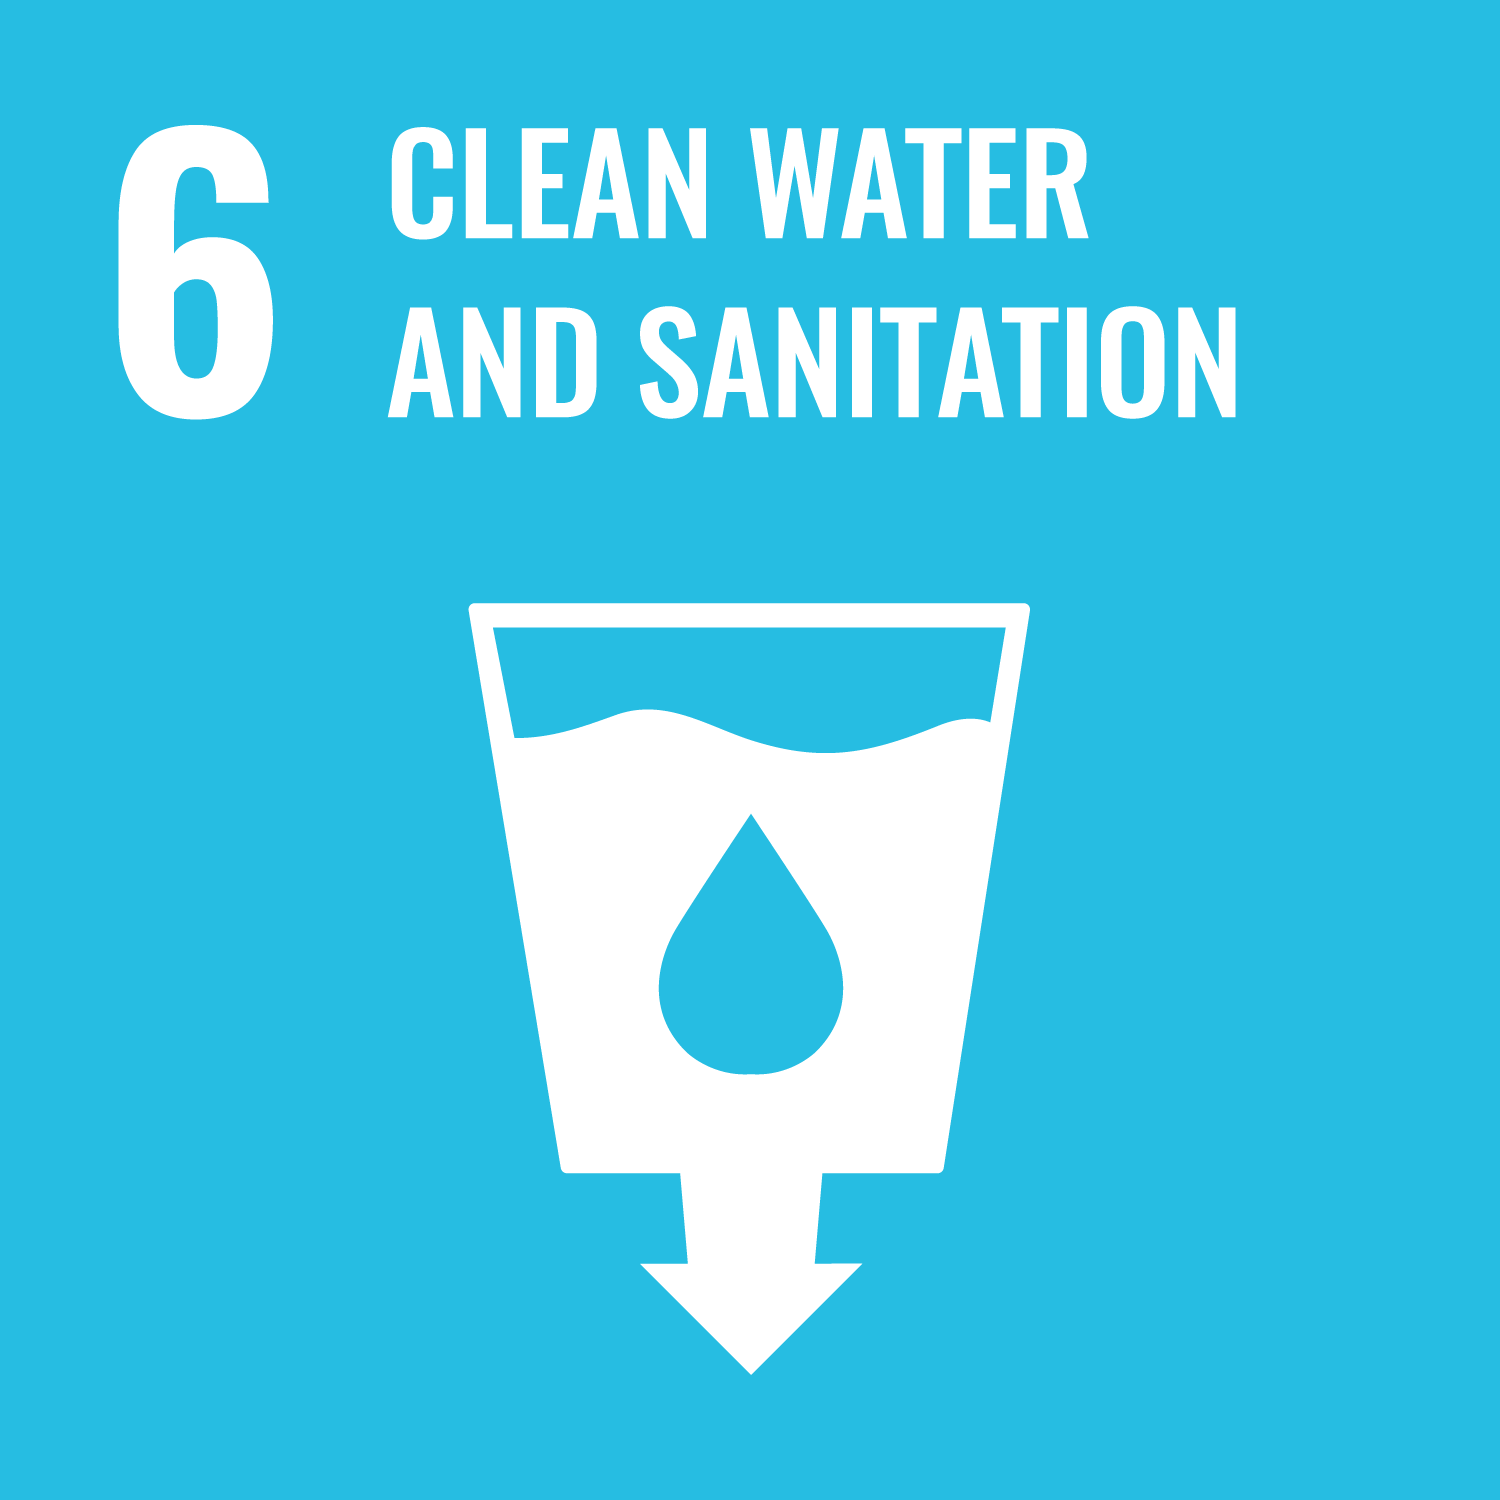 06. Clean water and sanitation